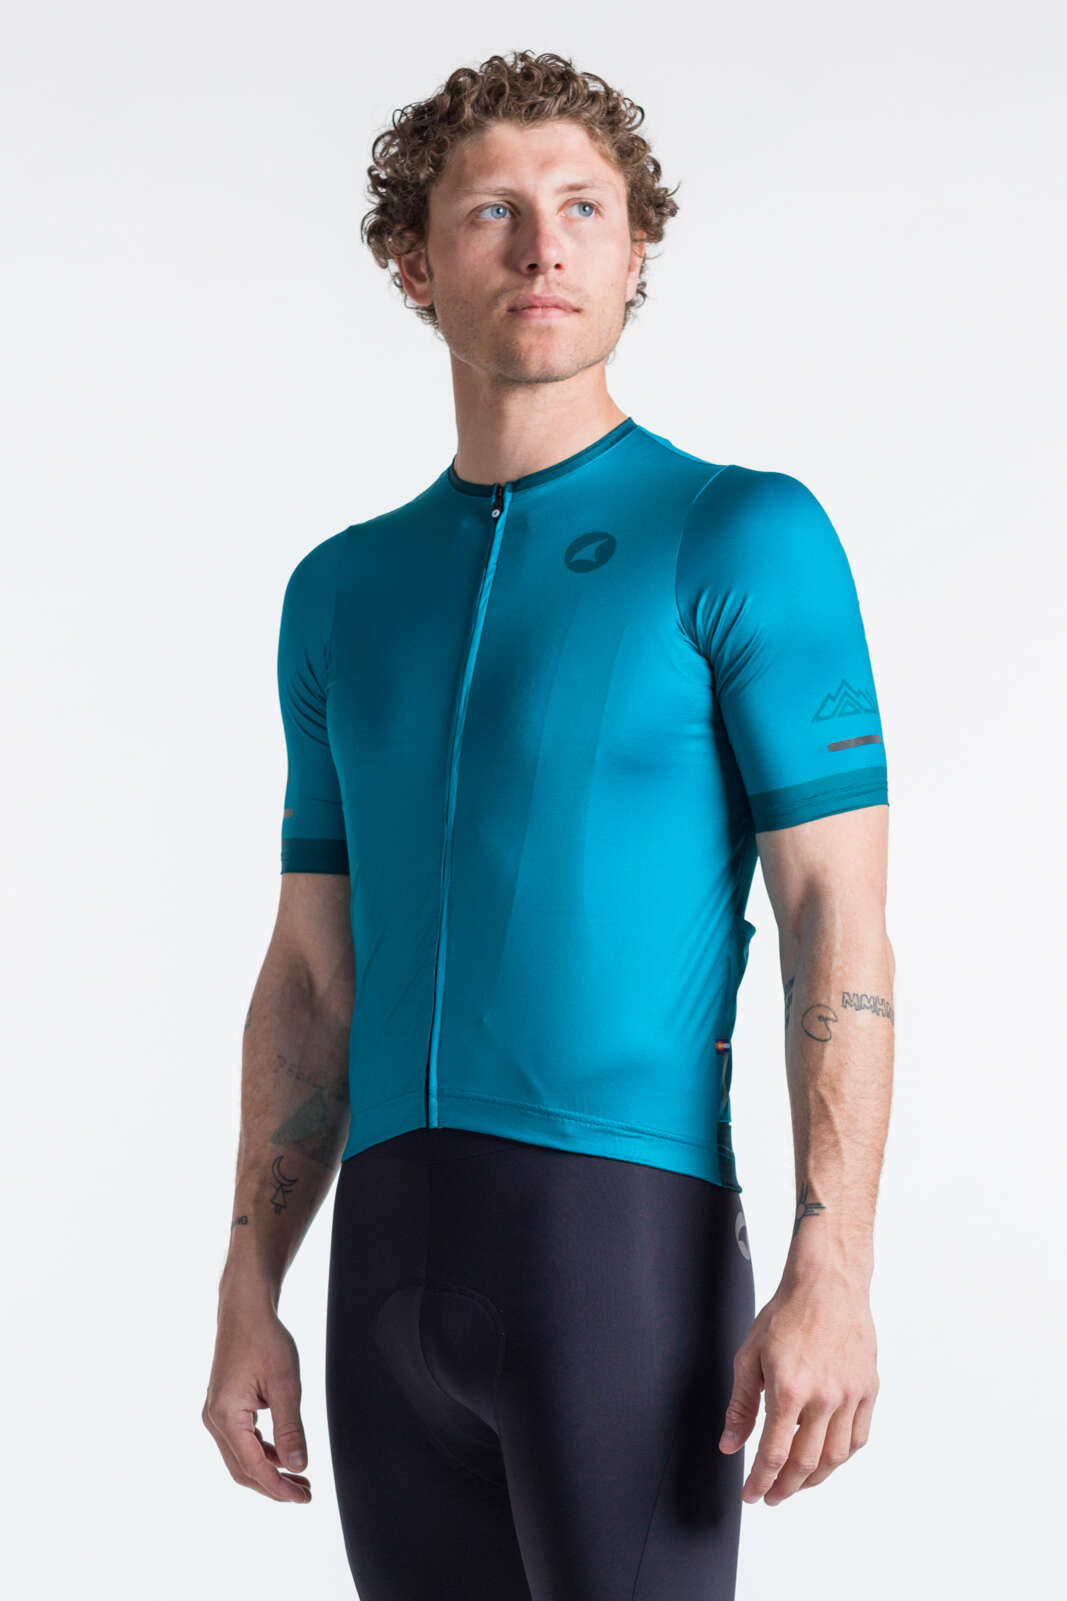 Men's Best Teal Cycling Jersey - Summit Front View